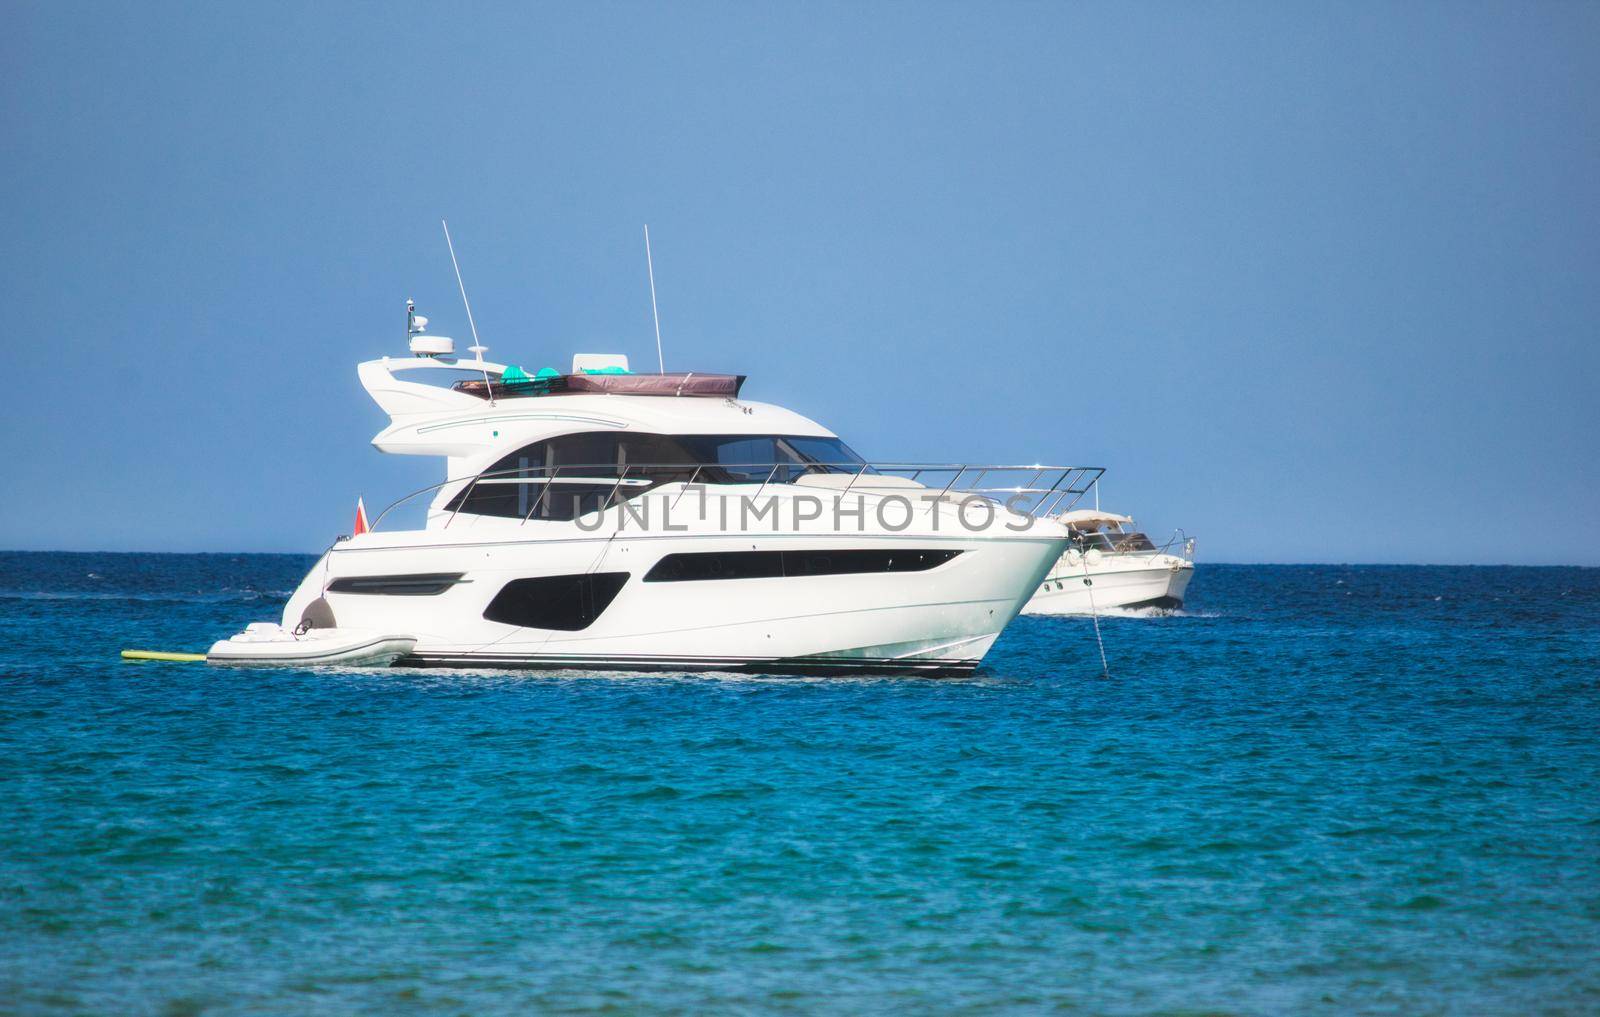 A luxury yacht sailing on the sea with clear blue sky and horizon visible in the background